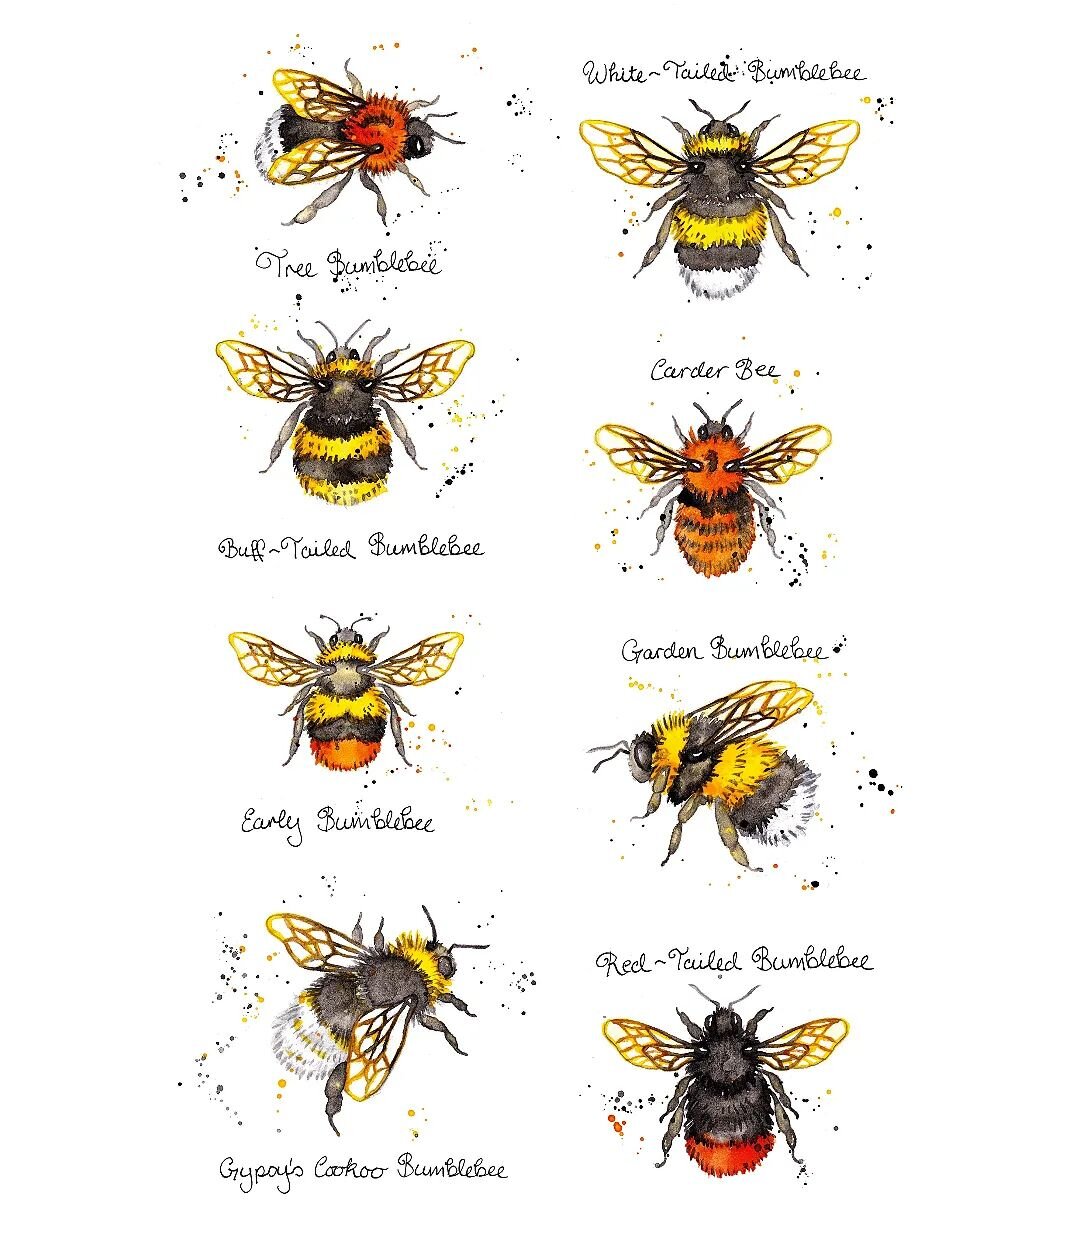 The Little Book of Bees turned 3 years old in August! Here is a collection of bumblebees of Europe that were illustrated for the Book! 🐝🐝

#thelittlebookofbees #bookillustration
#bees #beebooks #watercolours #watercolourbees
#watercolourillustratio